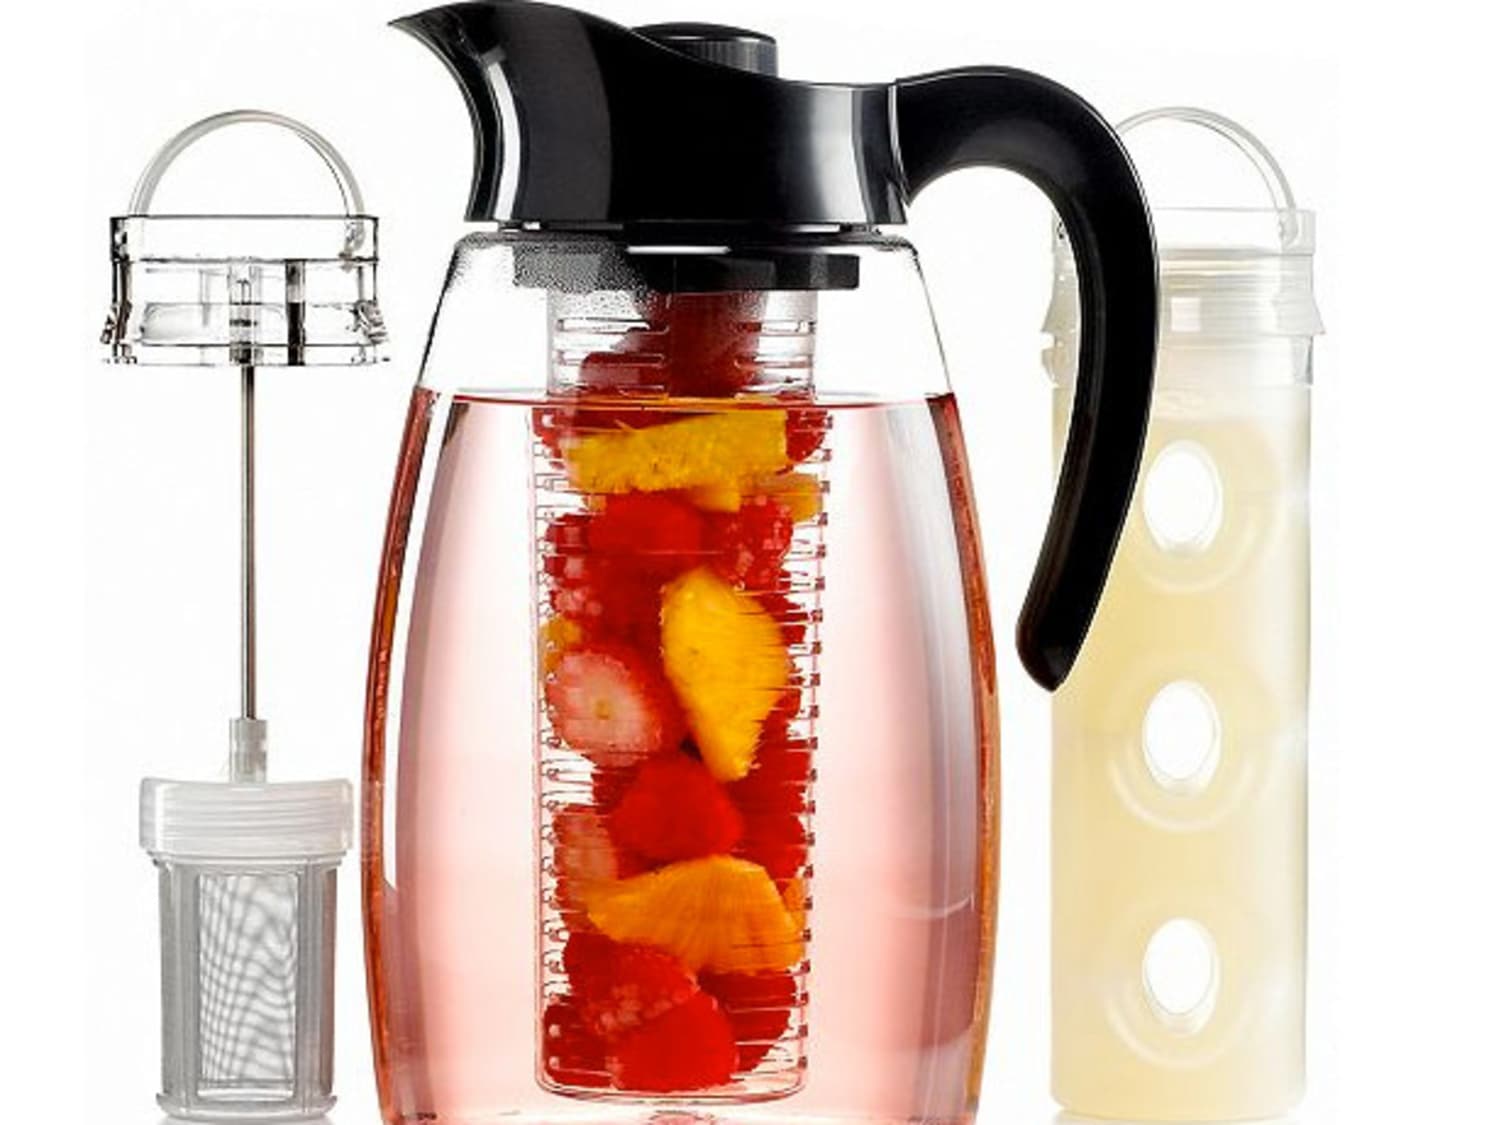 Prinxy Water Pitcher,Fruit Infuser Pitcher with Removable Lid,High Heat Resistance Infusion Pitcher for Hot/Cold Water,Flavor-Infused Beverage & Iced